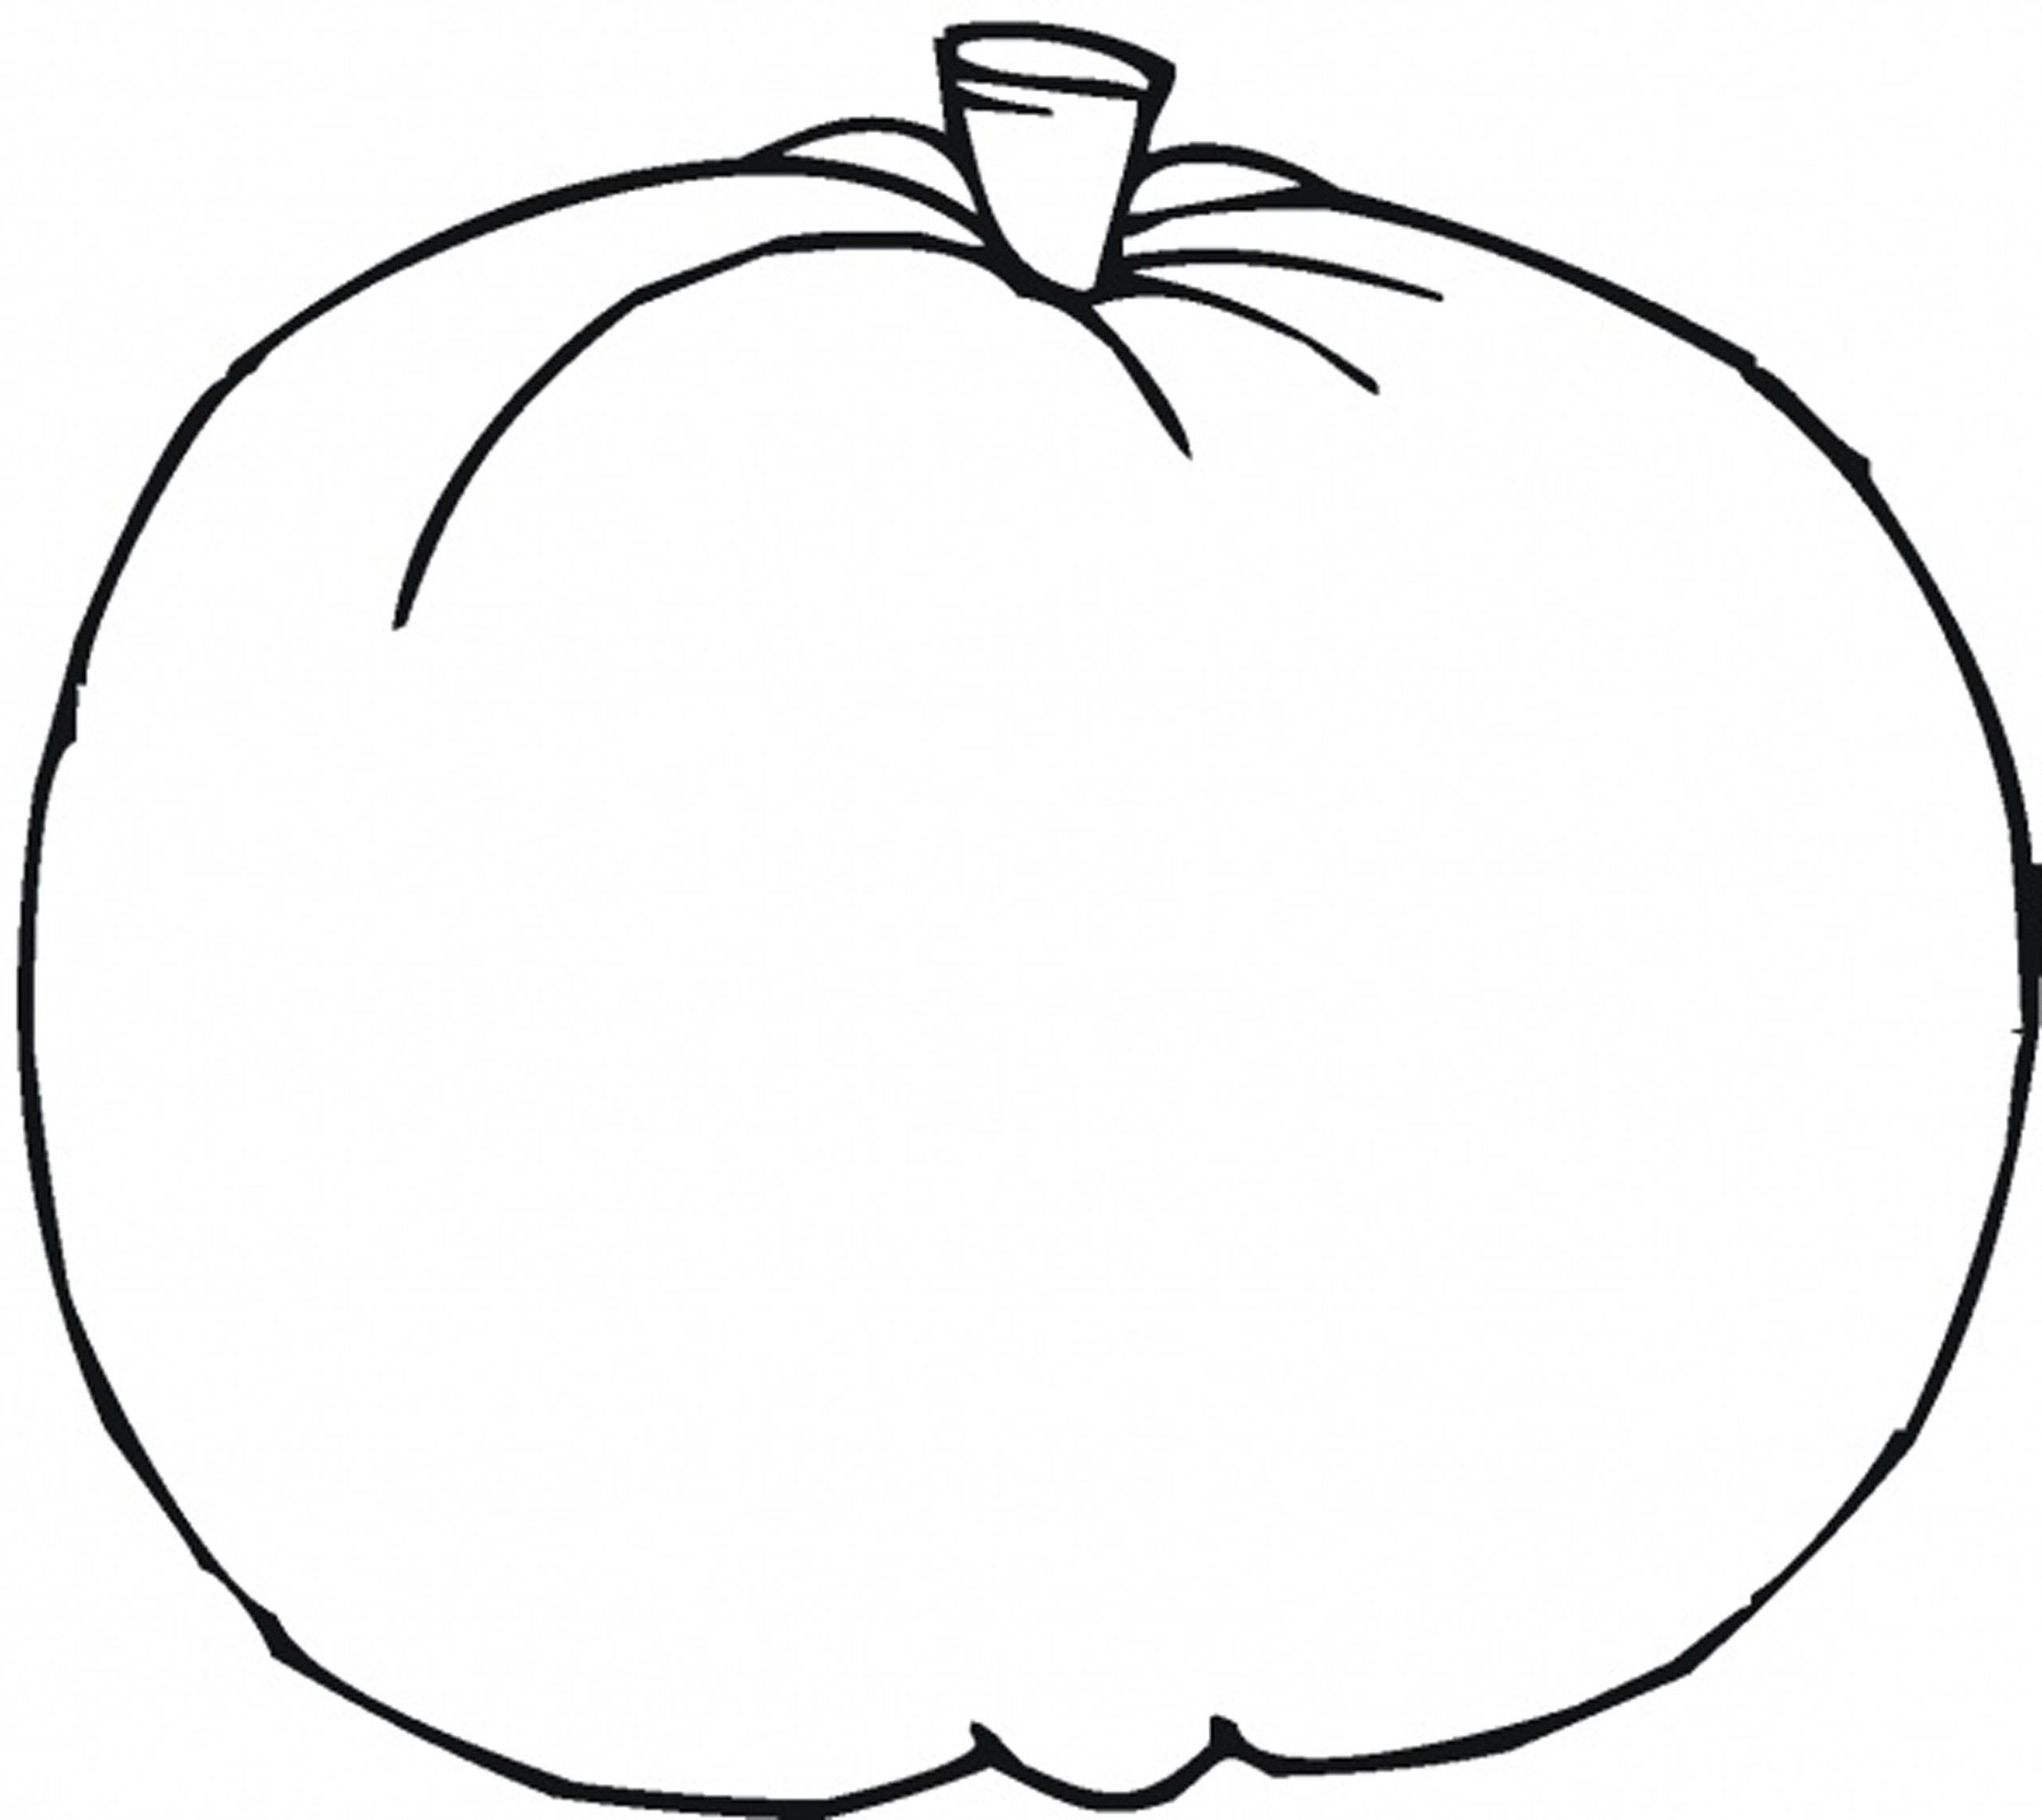 Preschool Pumpkin Coloring Pages Free - High Quality Coloring Pages